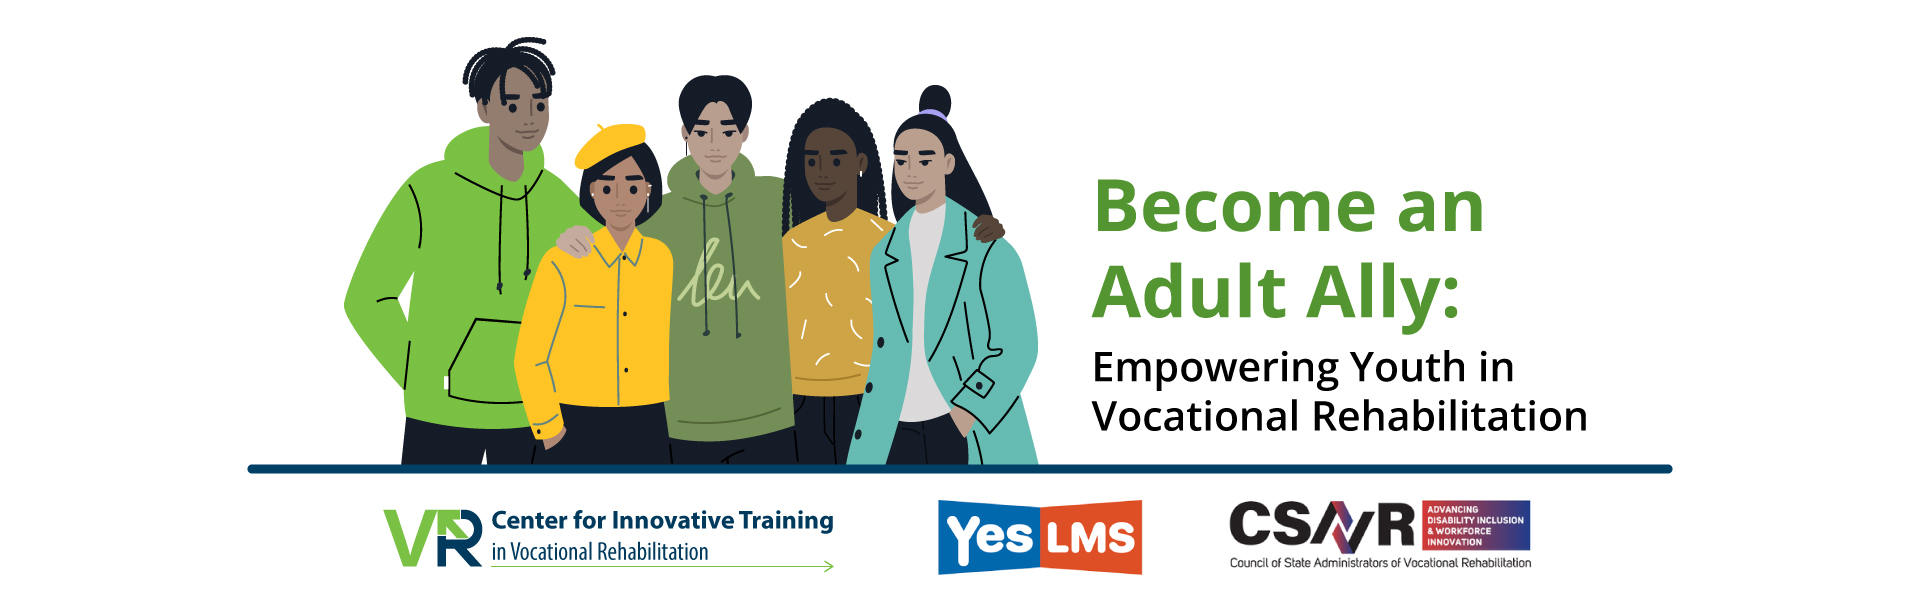 Featured image for “Become an Adult Ally: Empowering Youth in Vocational Rehabilitation”